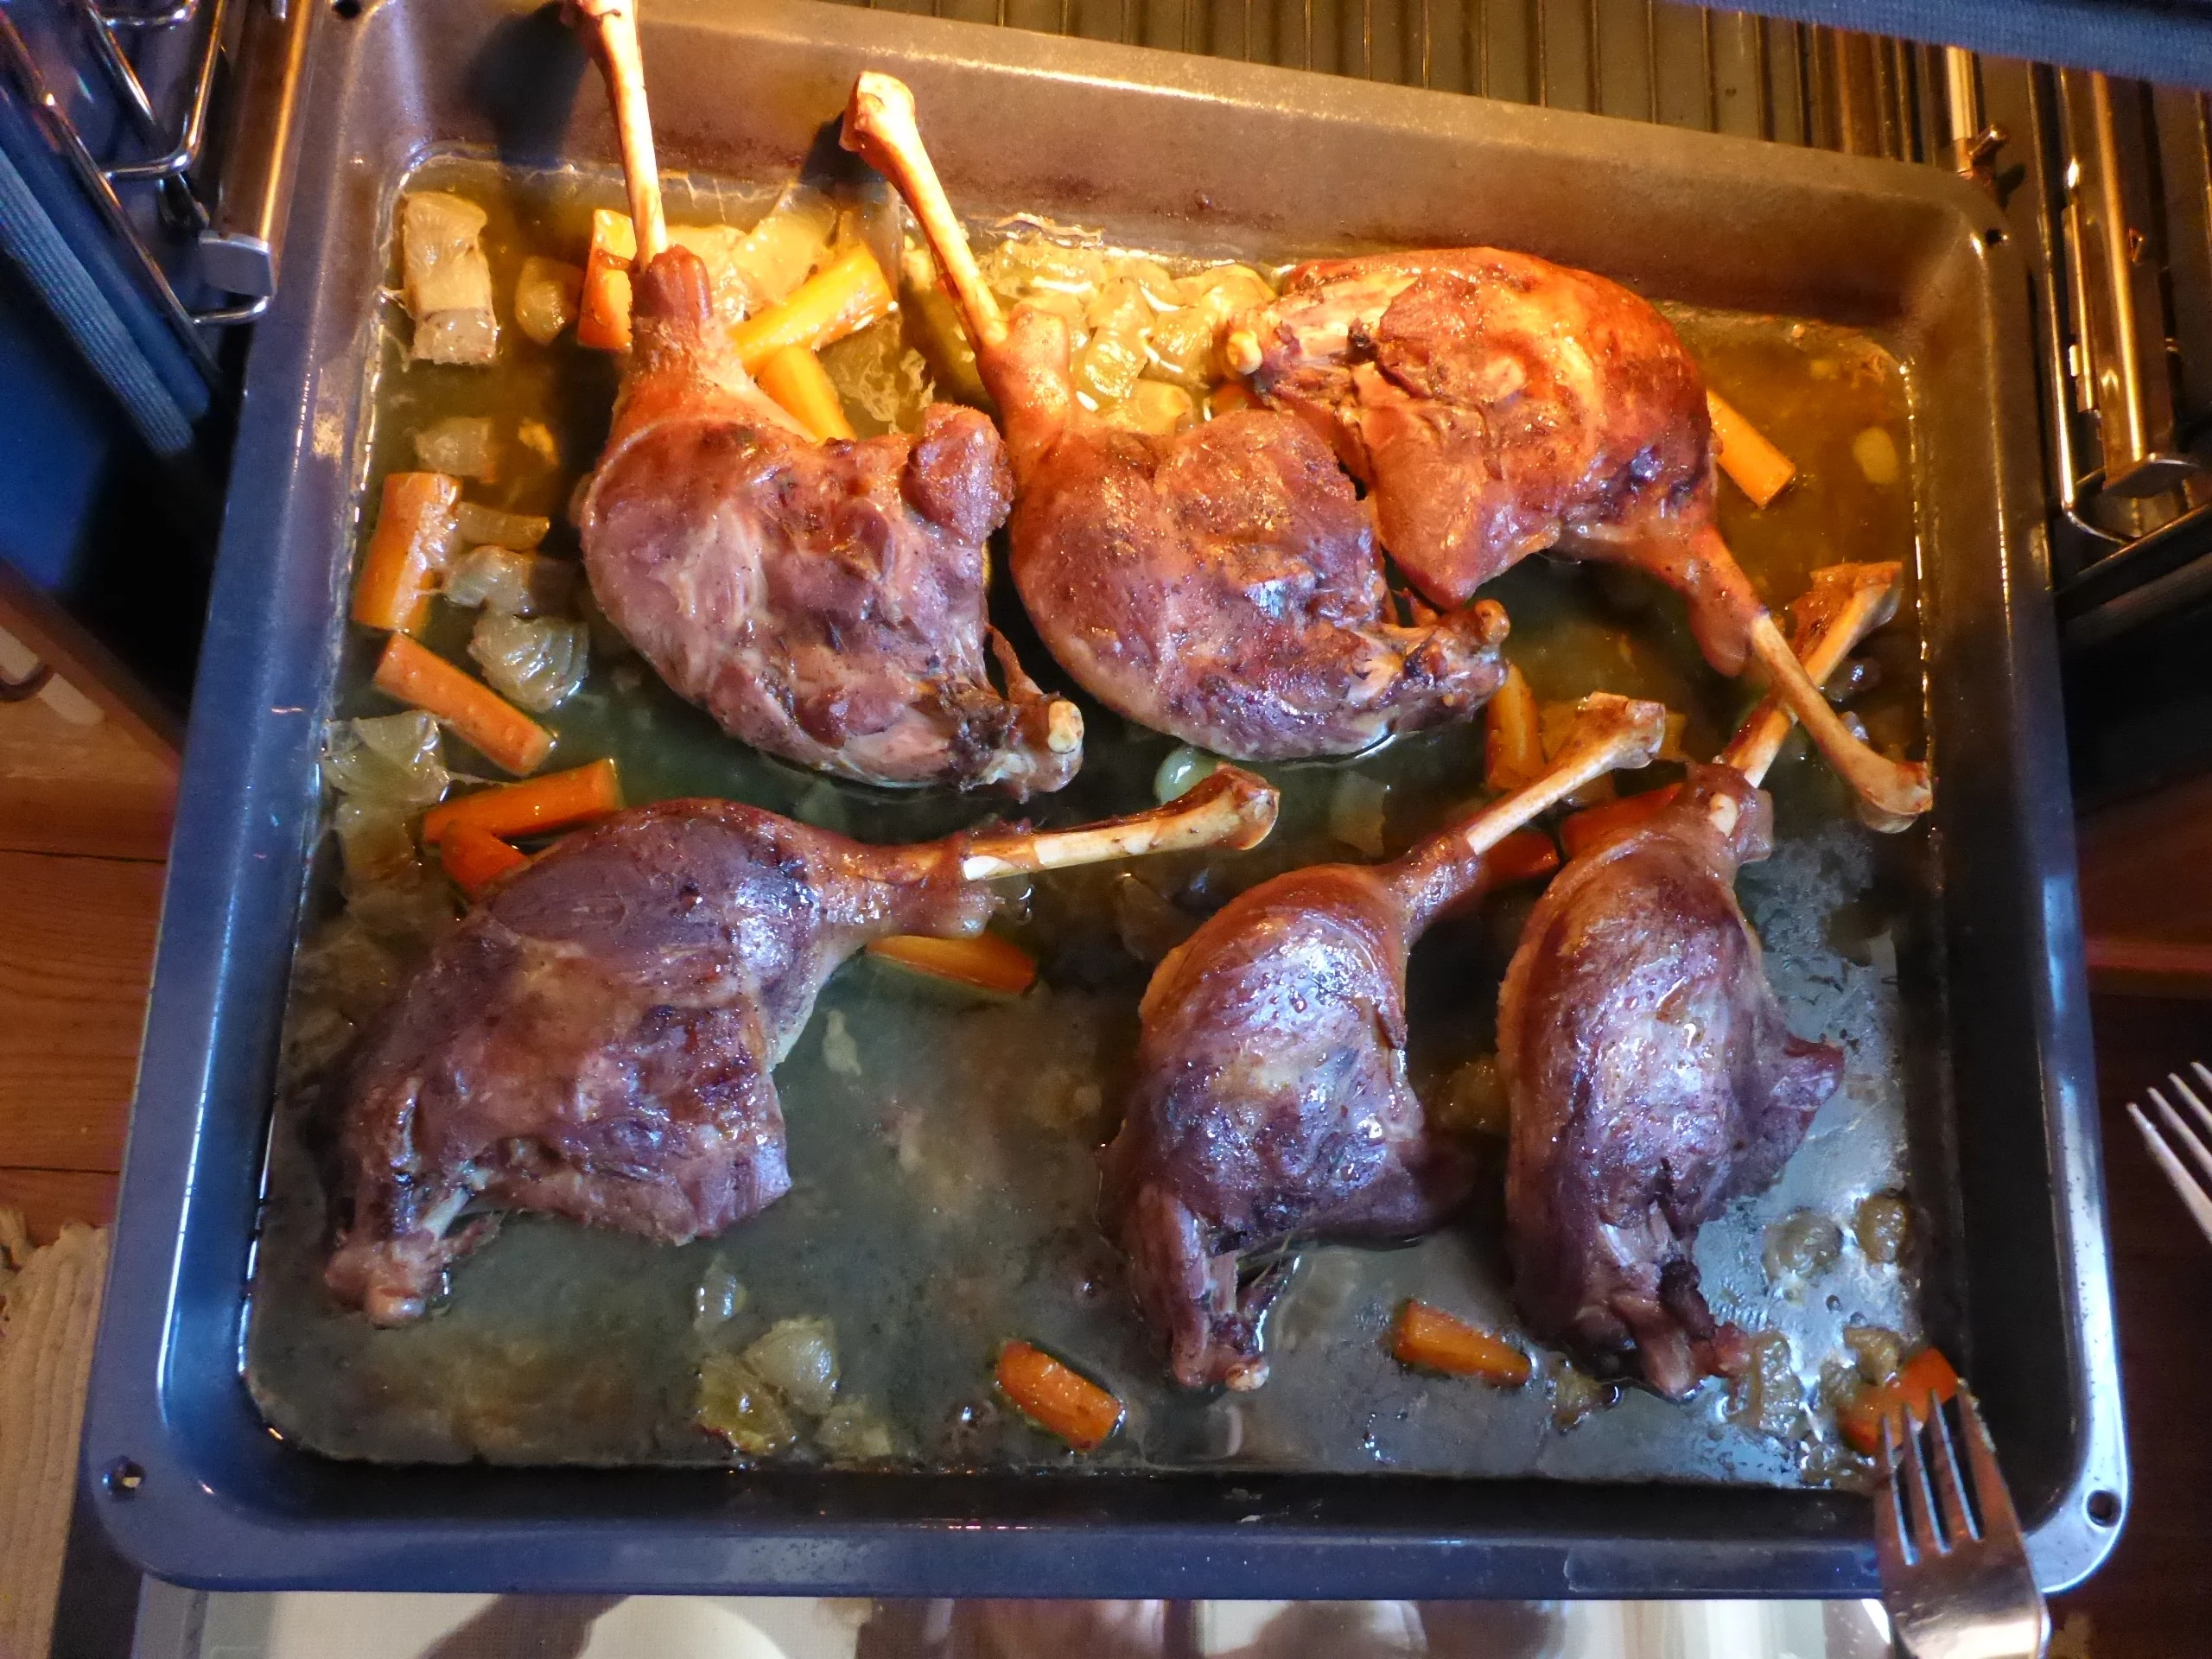 Goose legs and diced carrots and onions on a baking sheet inside the oven, almost through with the roasting process.